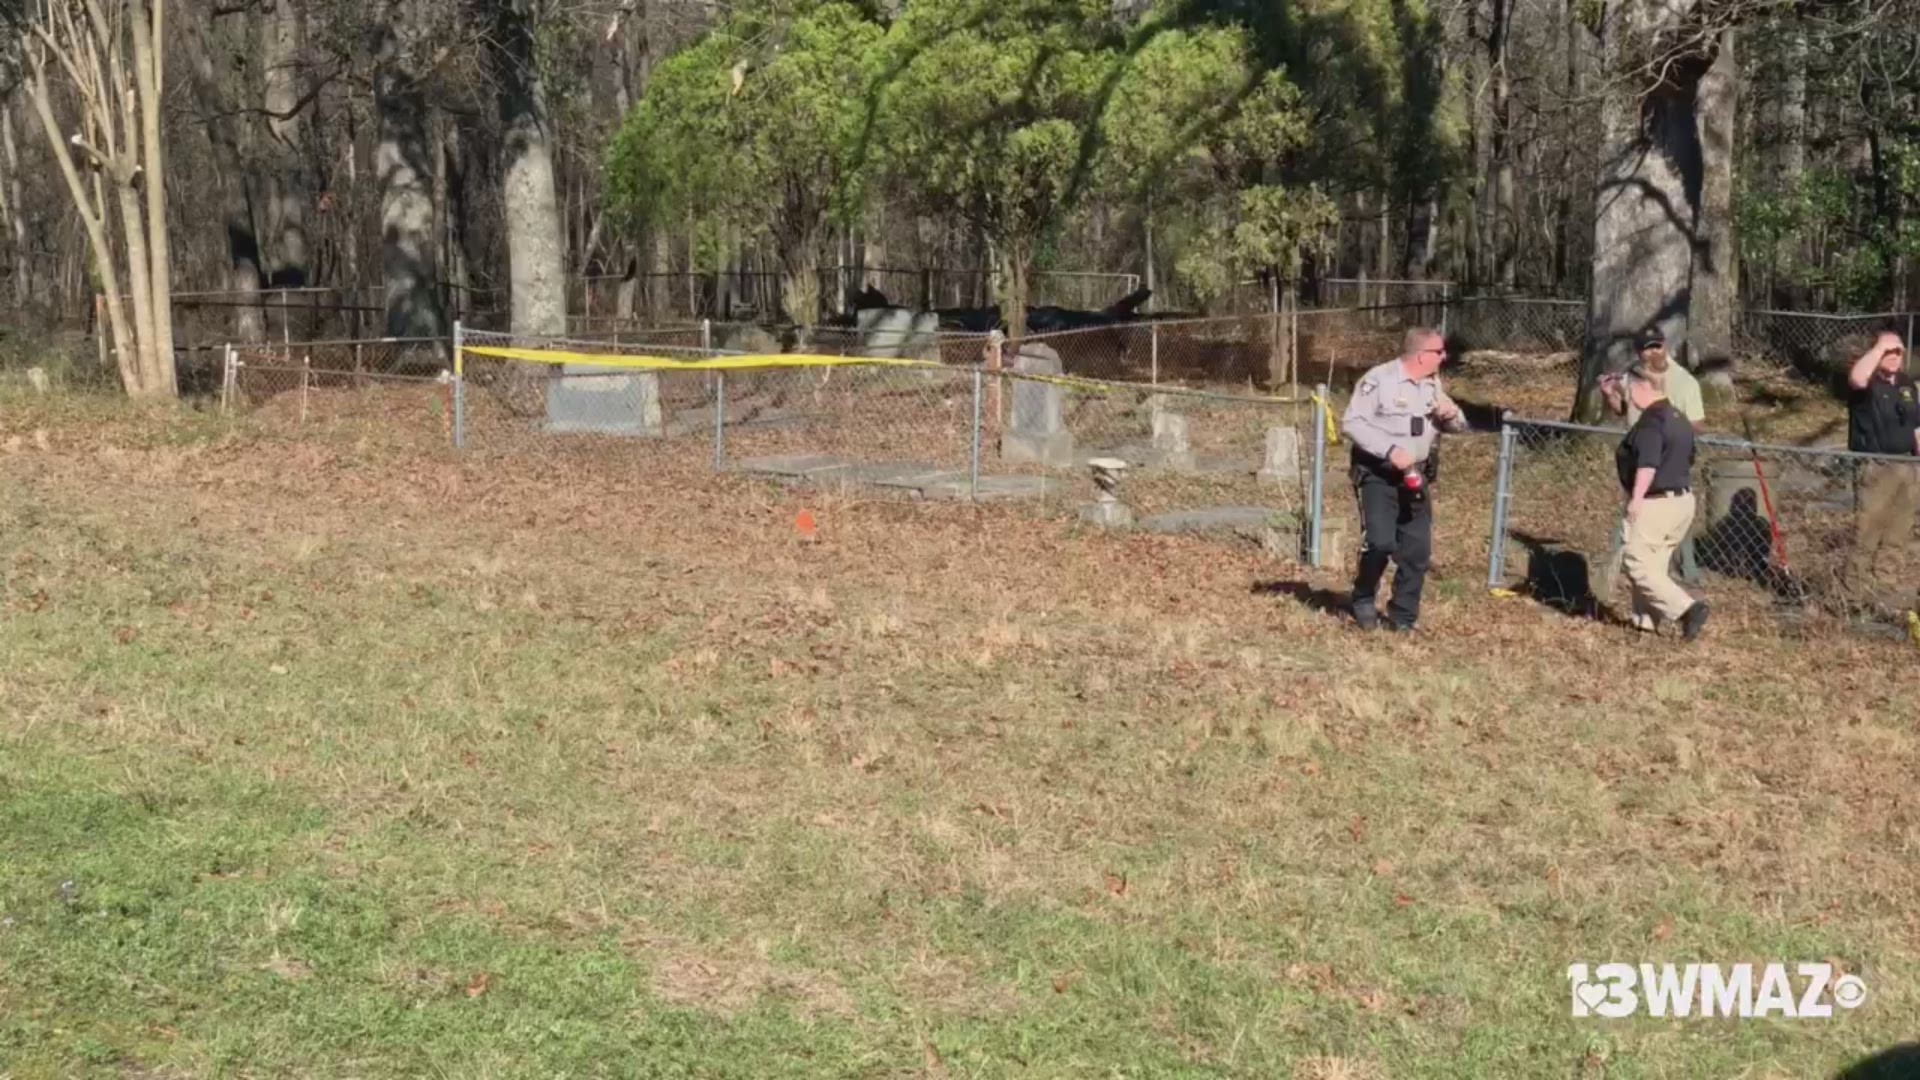 Crime scene investigators responded, checked the grave, and found the remains of a dog that was buried recently.